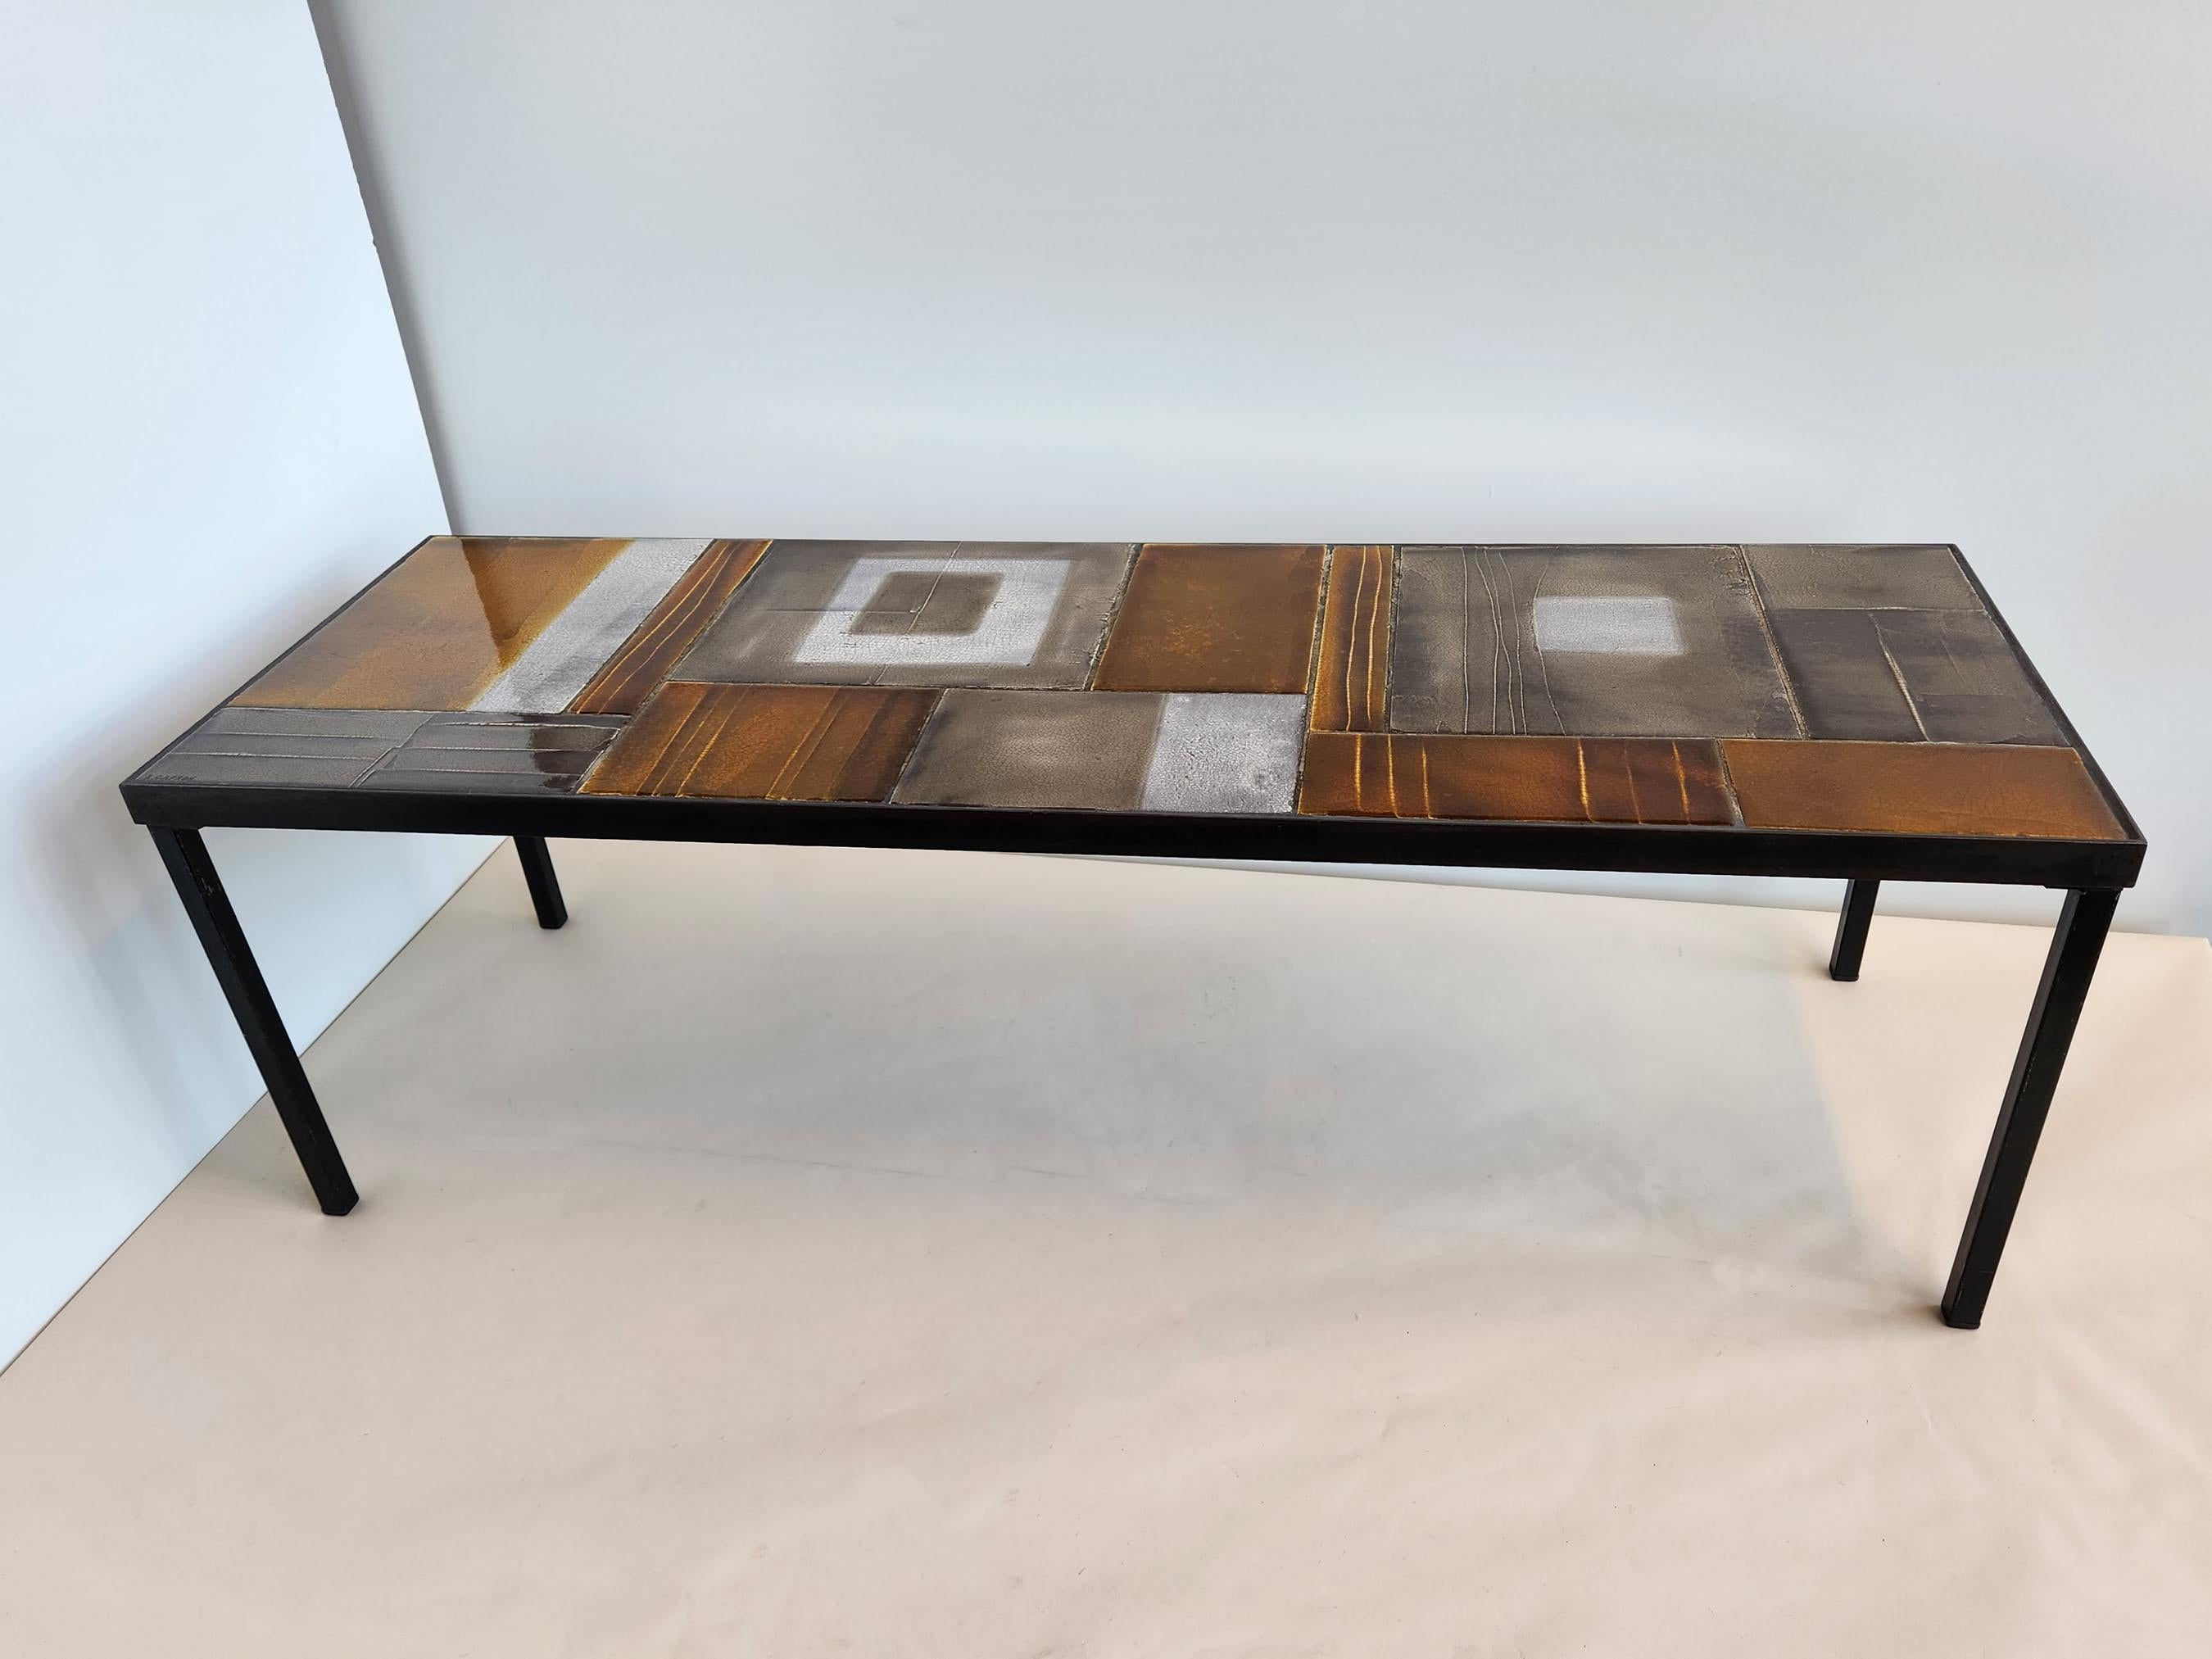 Roger Capron - Stunning Ceramic Coffee Table with Lava Tiles, Metal Frame, 1970s In Excellent Condition For Sale In Stratford, CT